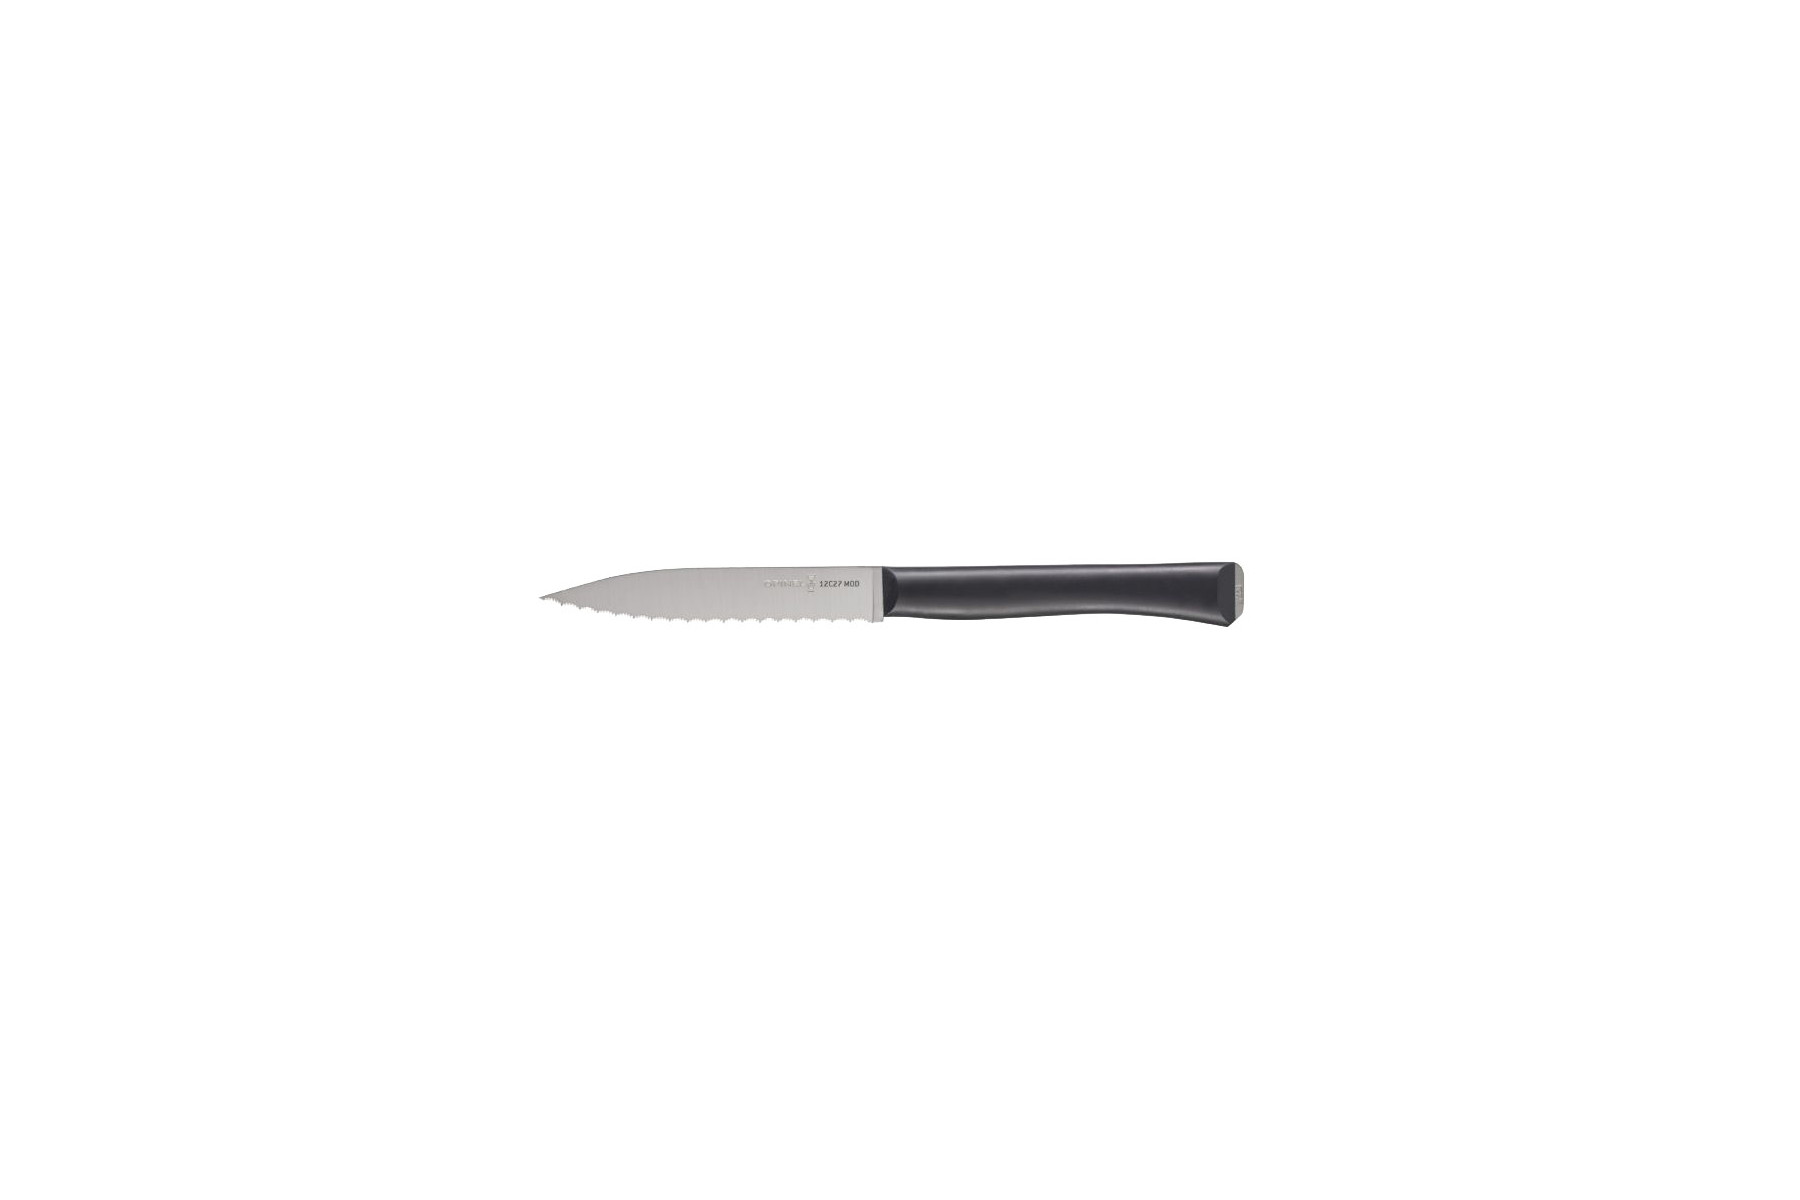 Couteau office / tomates Opinel INTEMPORA n°226 - 8 cm